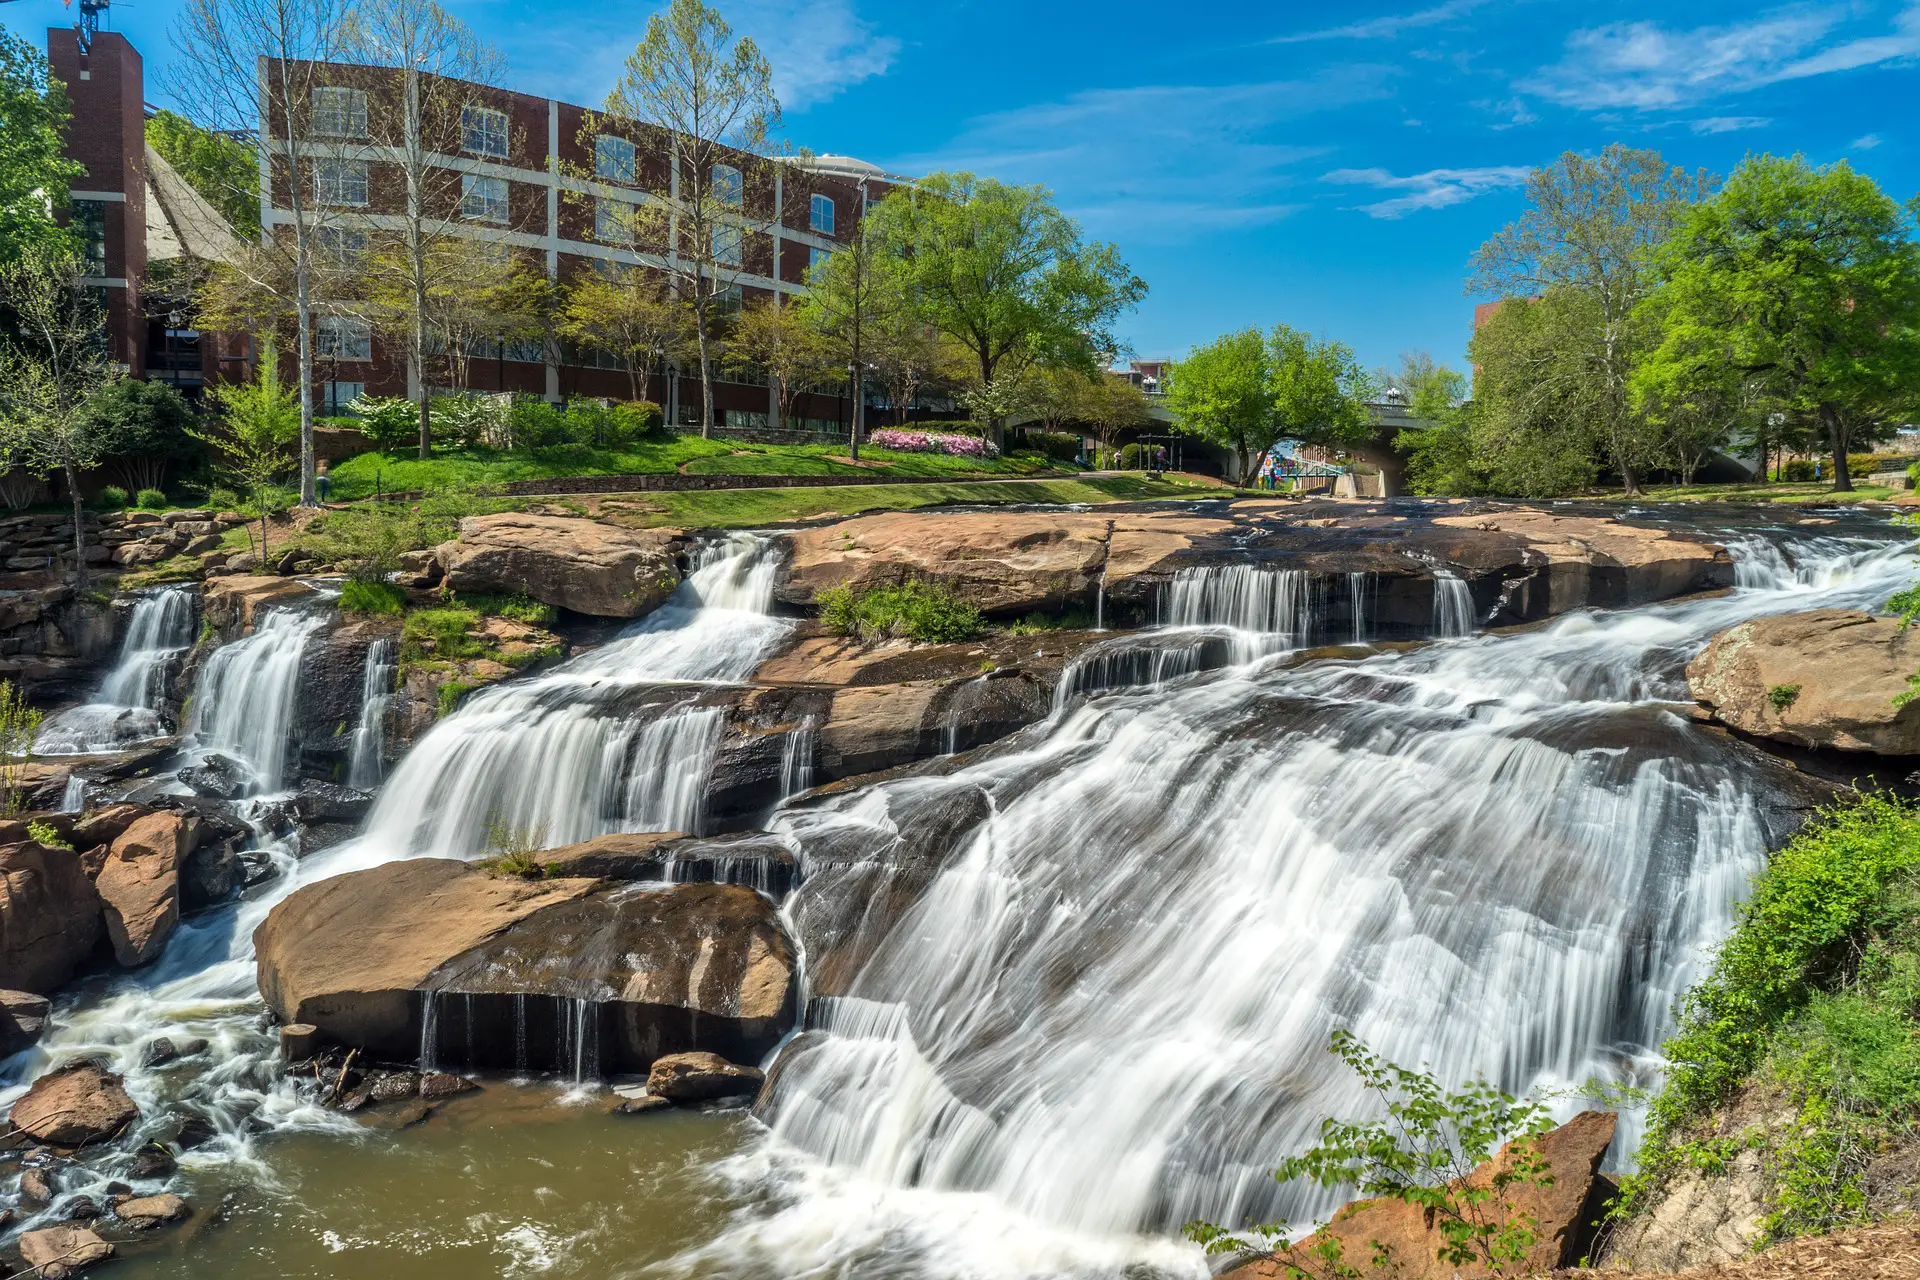 Waterfall on the Reedy River in downtown Greenville, South Carolina